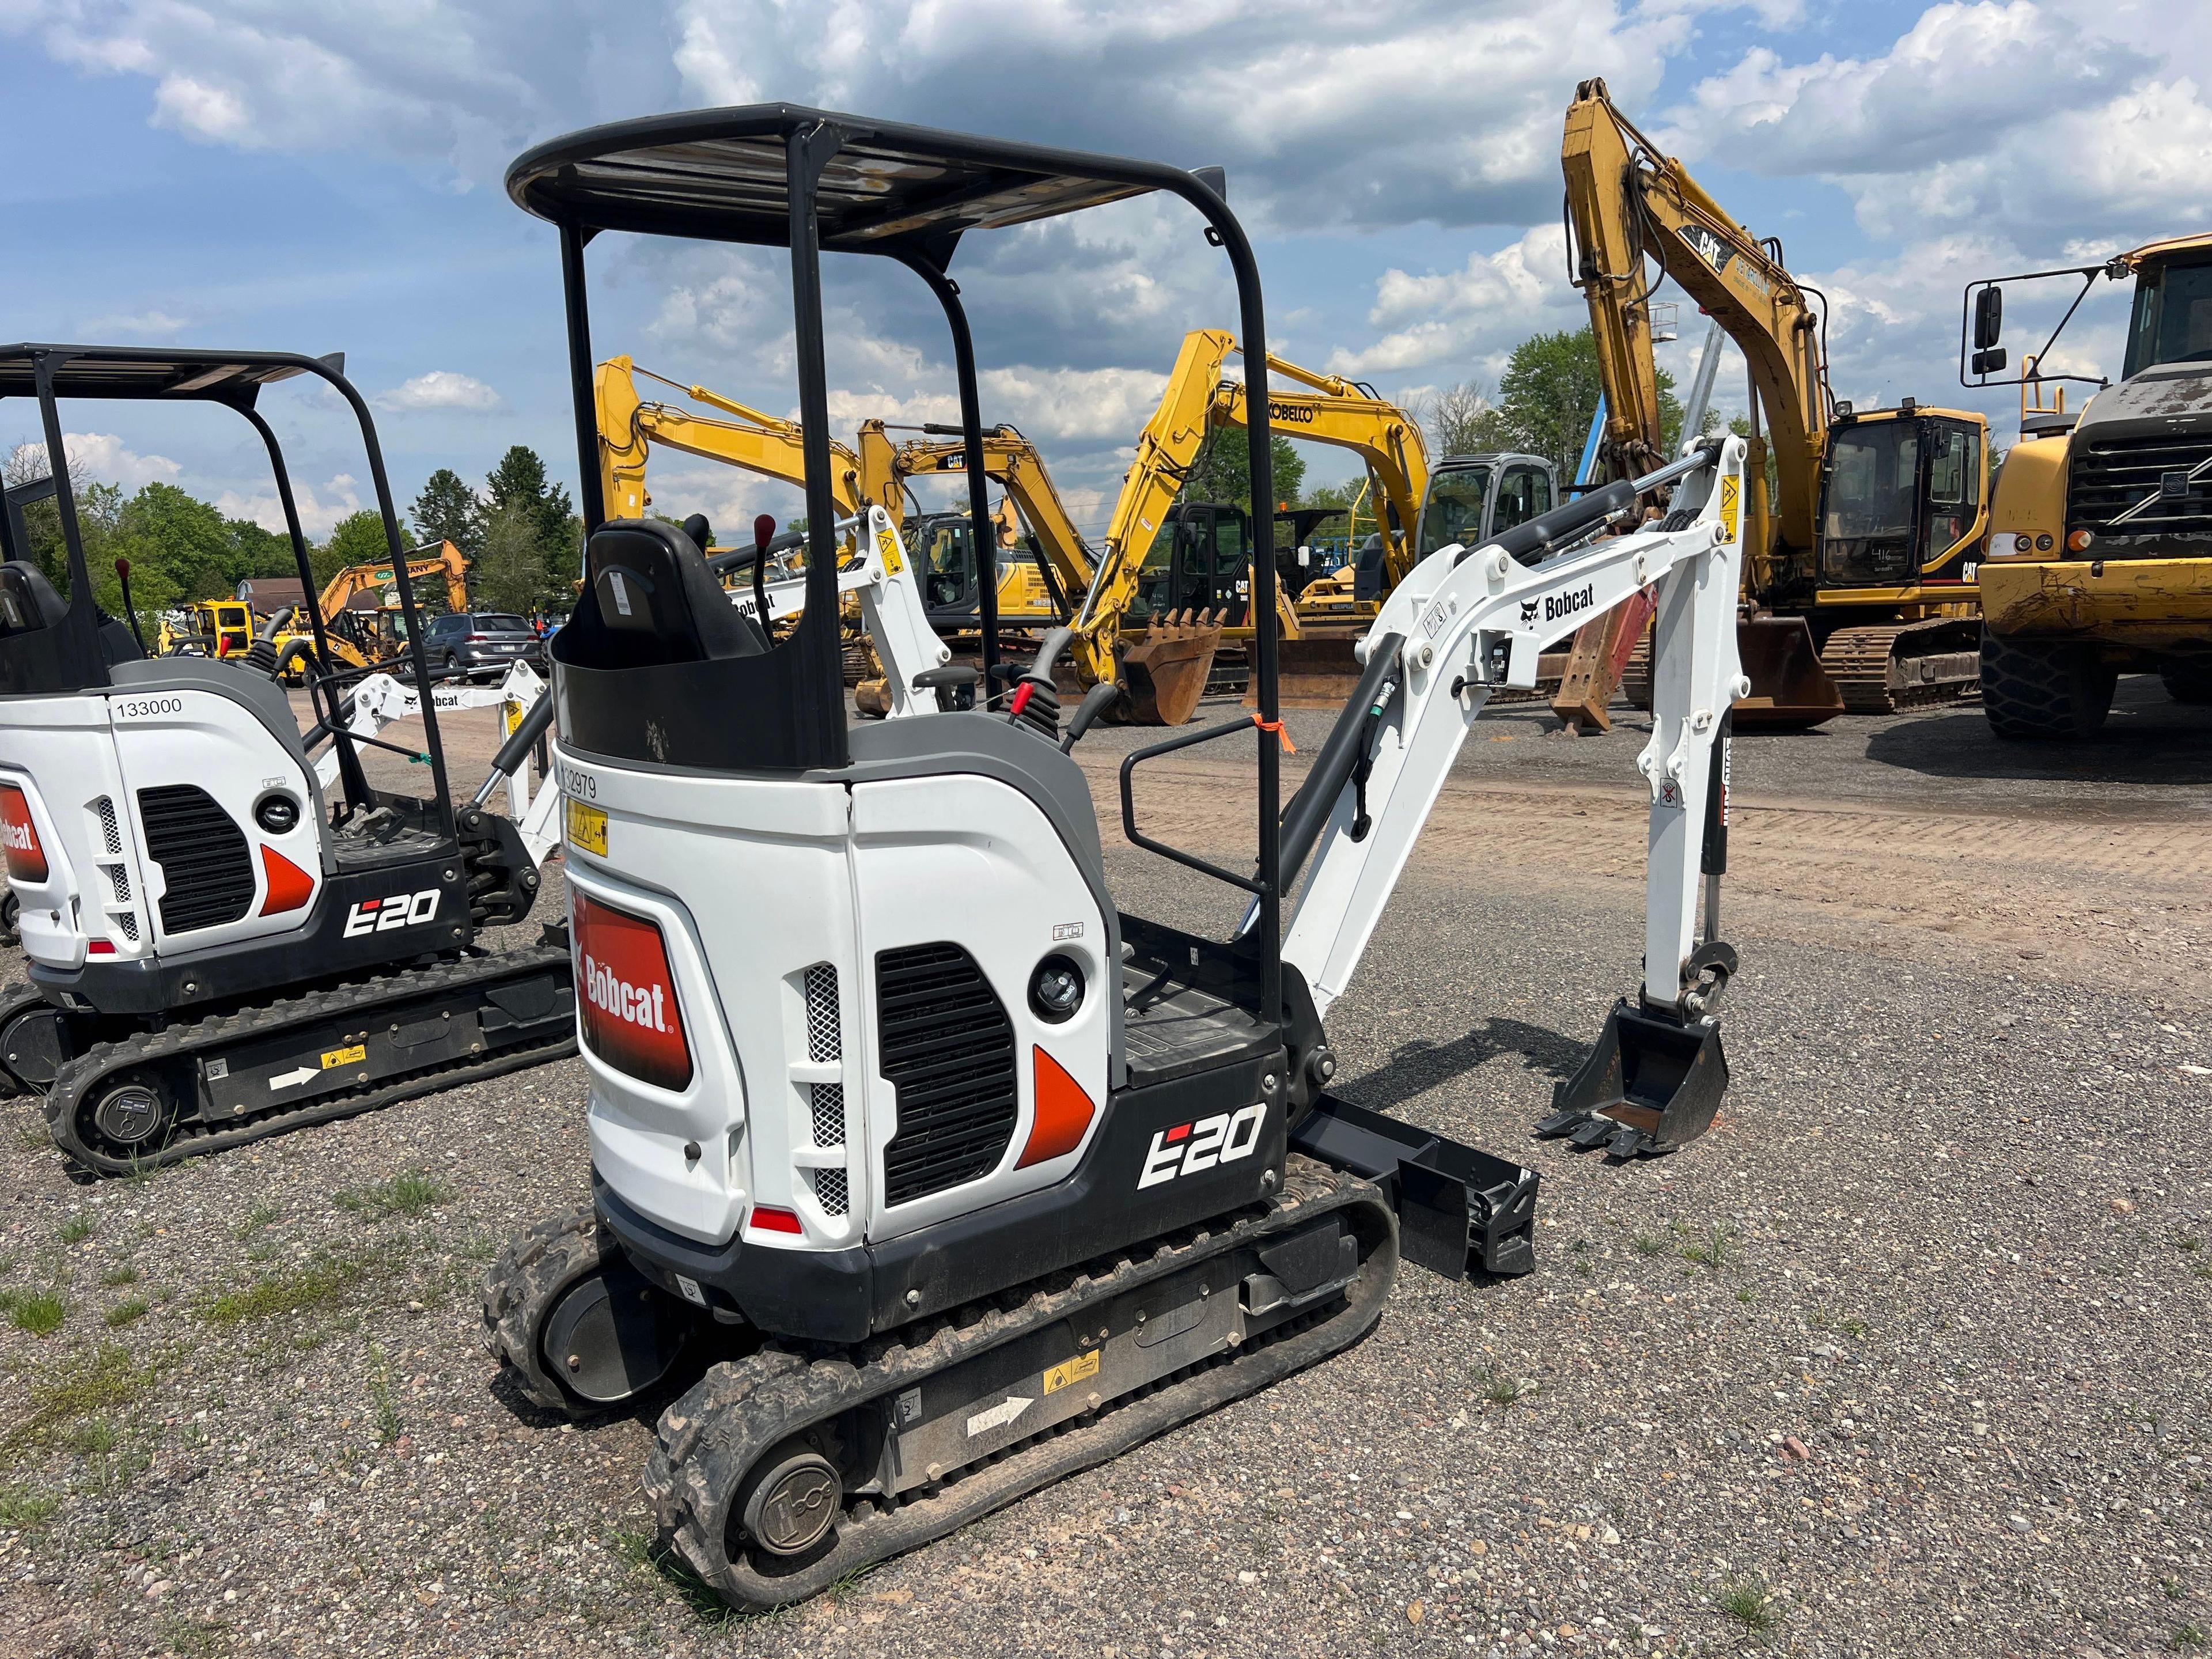 2023 BOBCAT E20 HYDRAULIC EXCAVATOR SN-11444 powered by diesel engine, equipped with OROPS, front